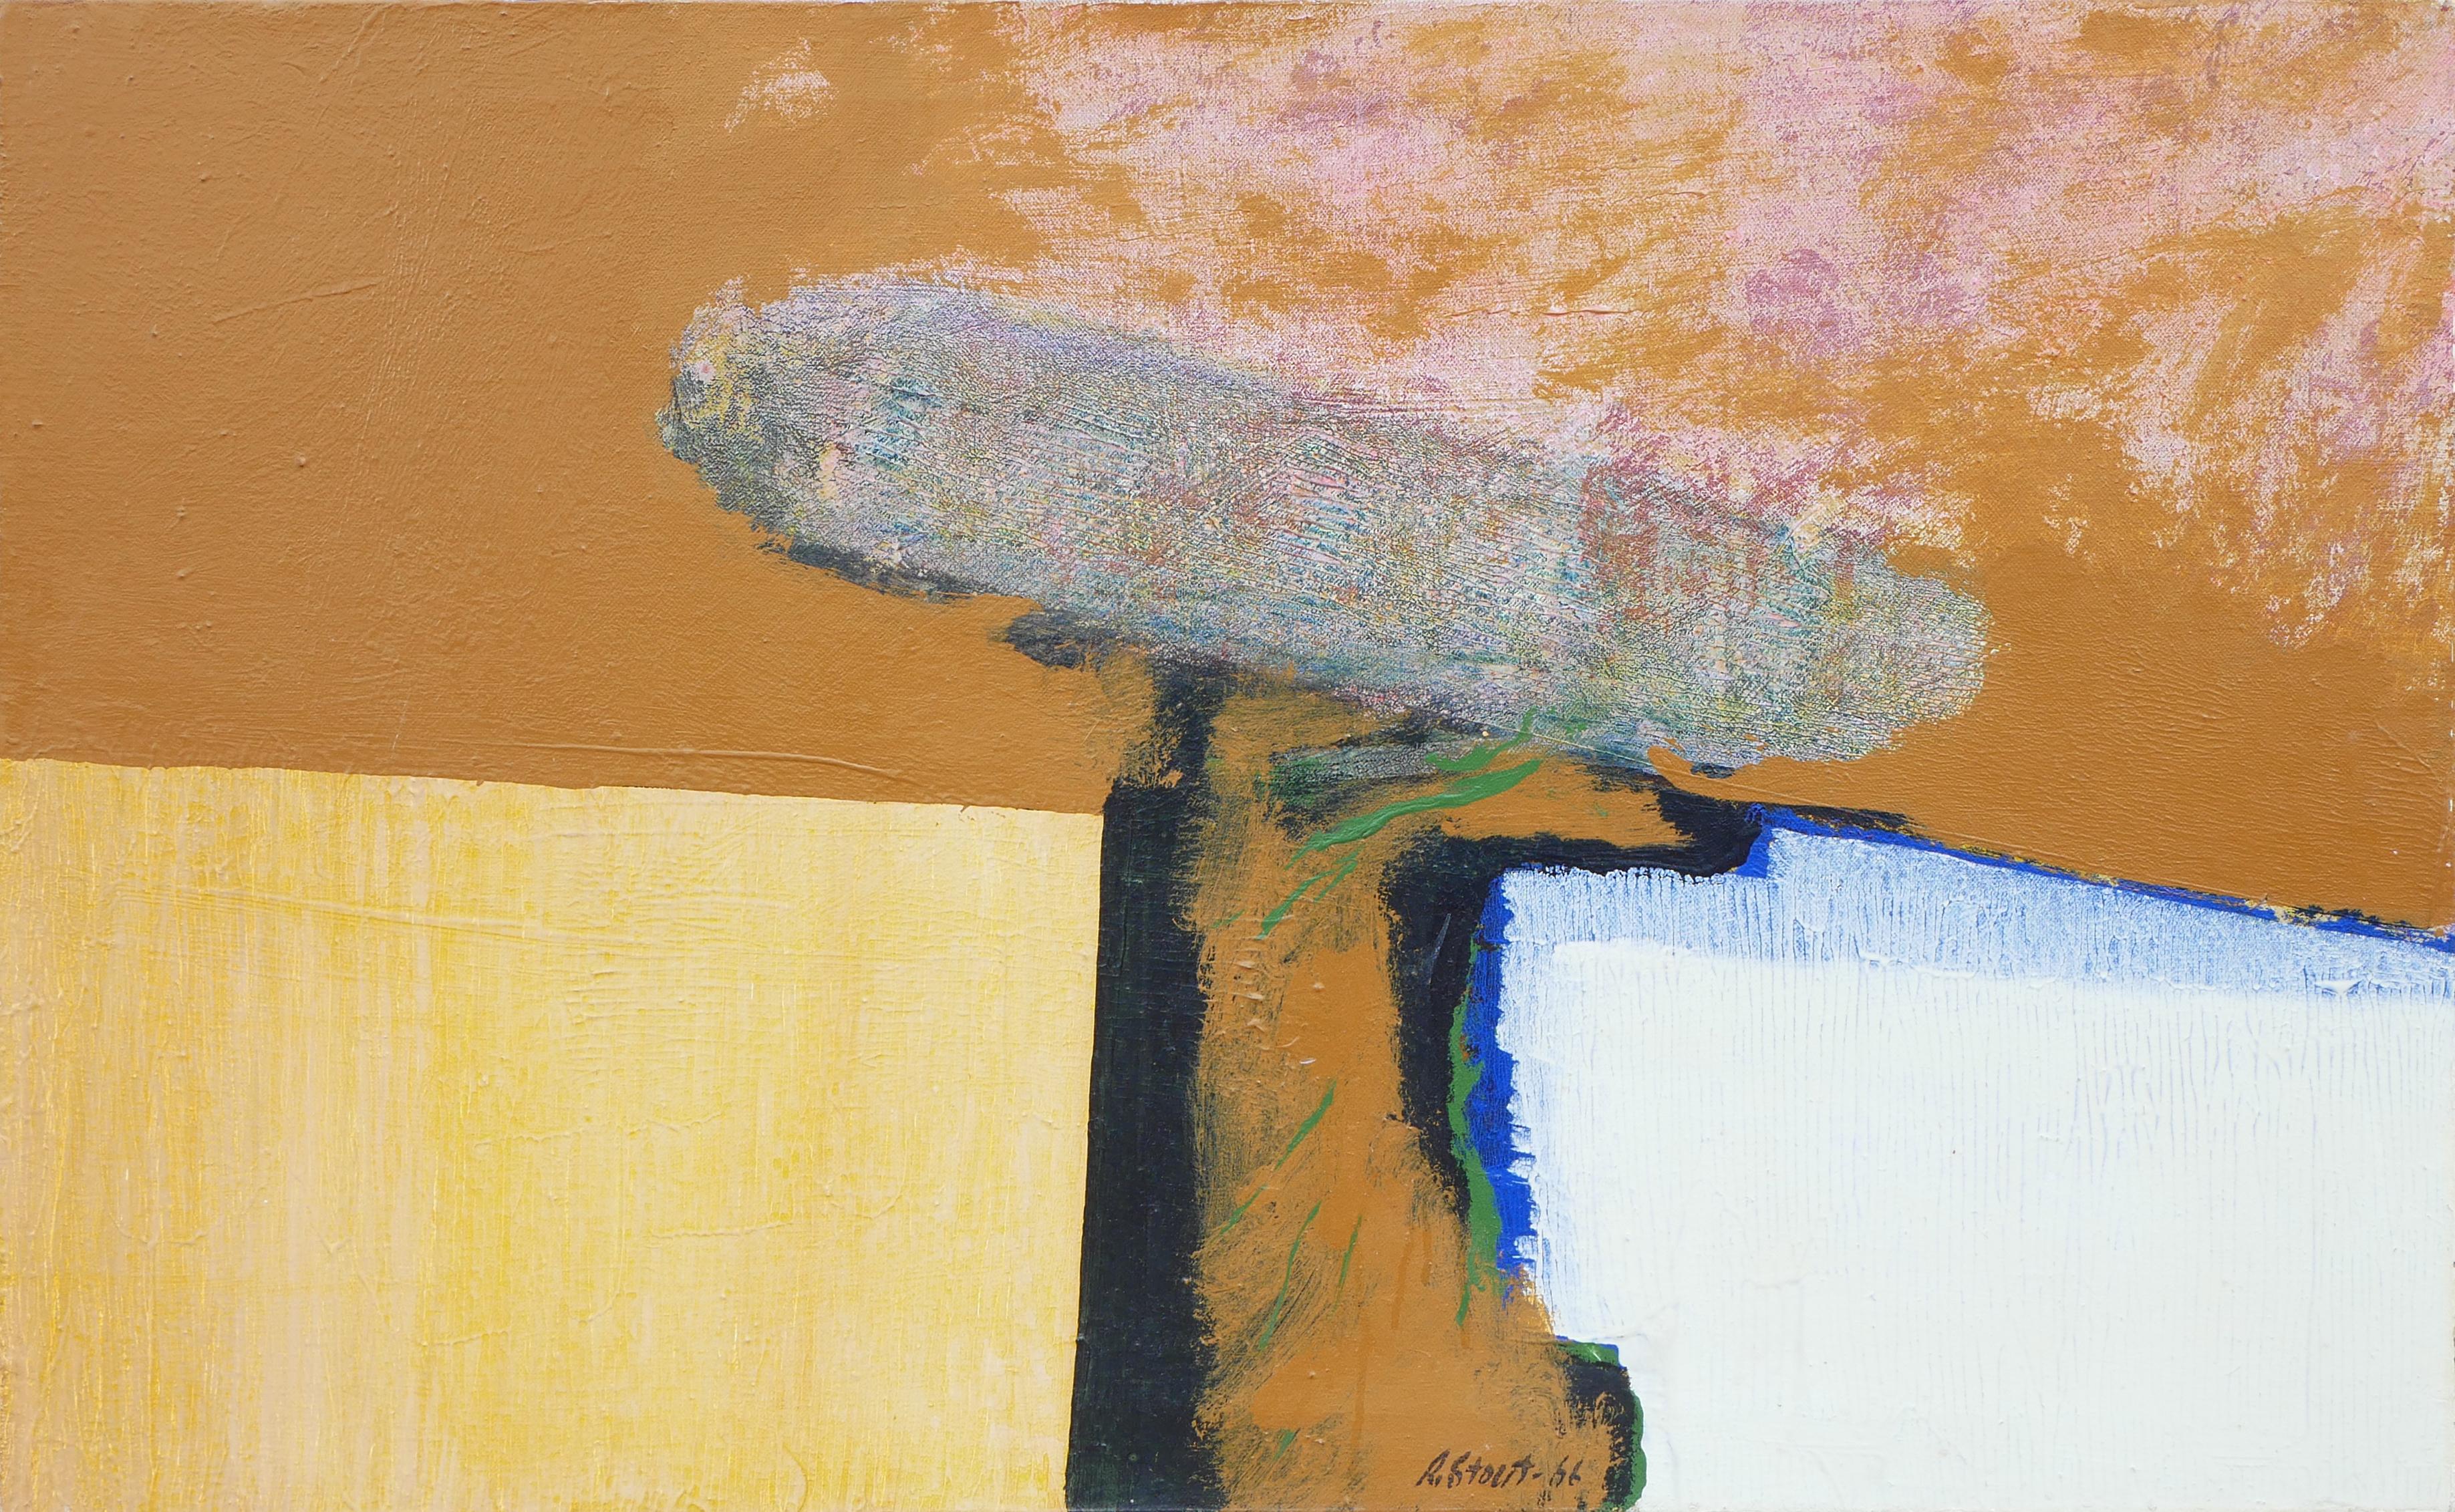 Richard Stout Abstract Painting - "Monument – Study" Brown and Blue Modern Abstract Surrealistic Painting